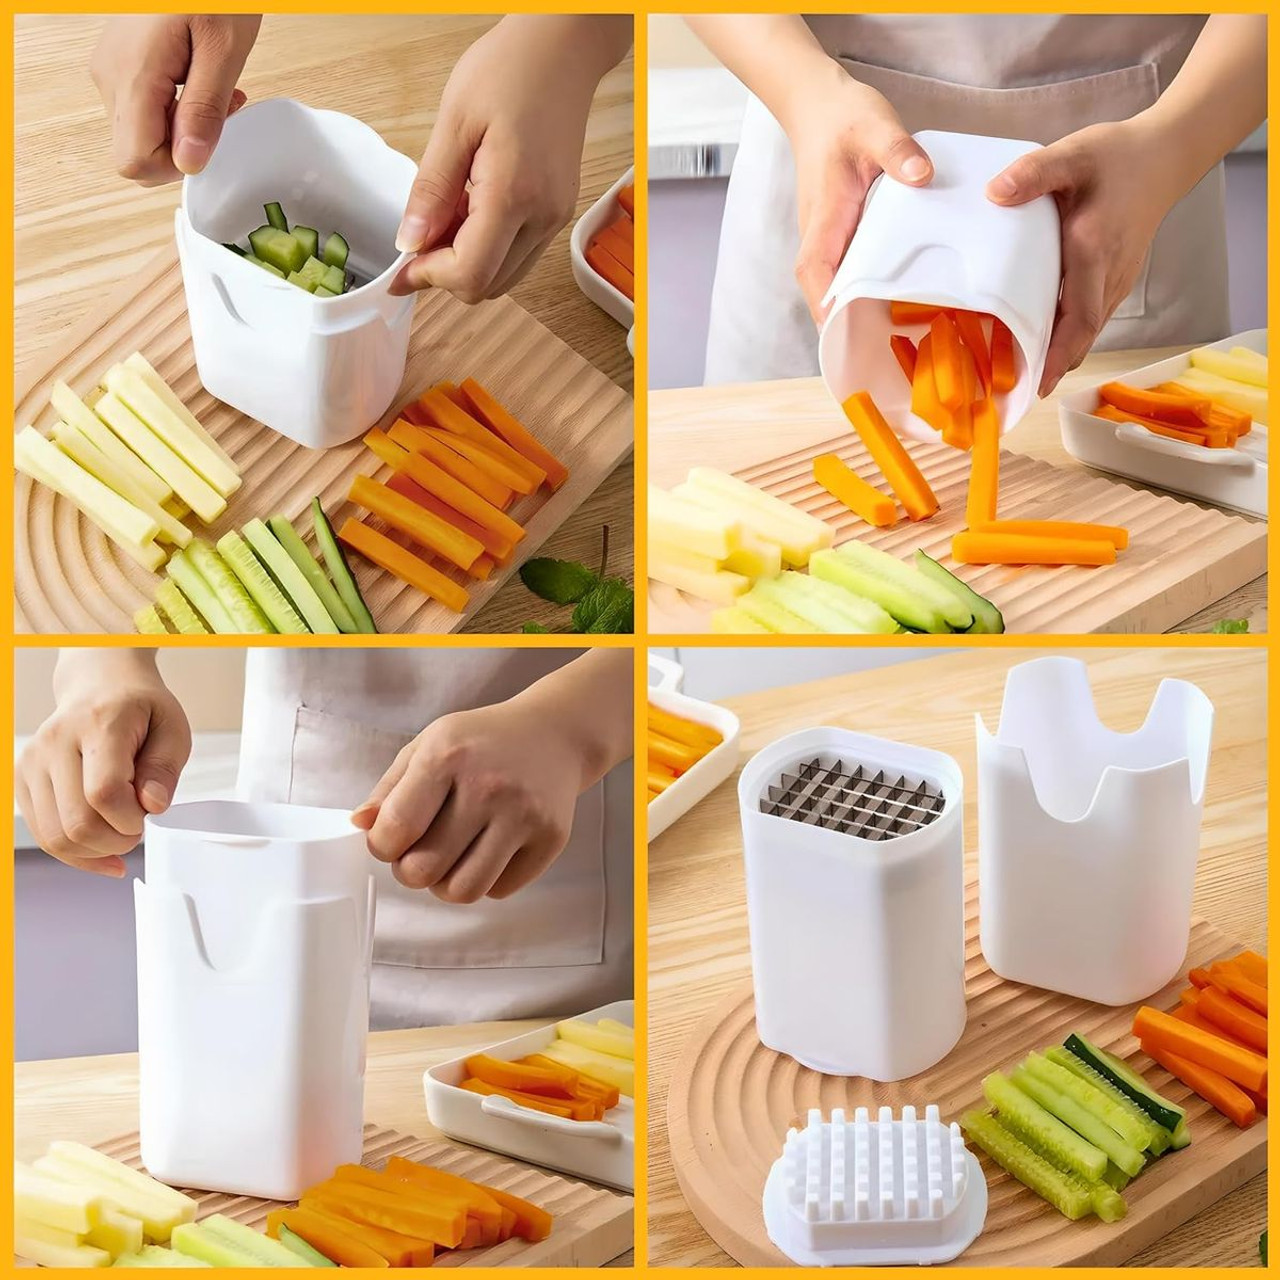 French Fries Potatoes Slicer Cutter product image